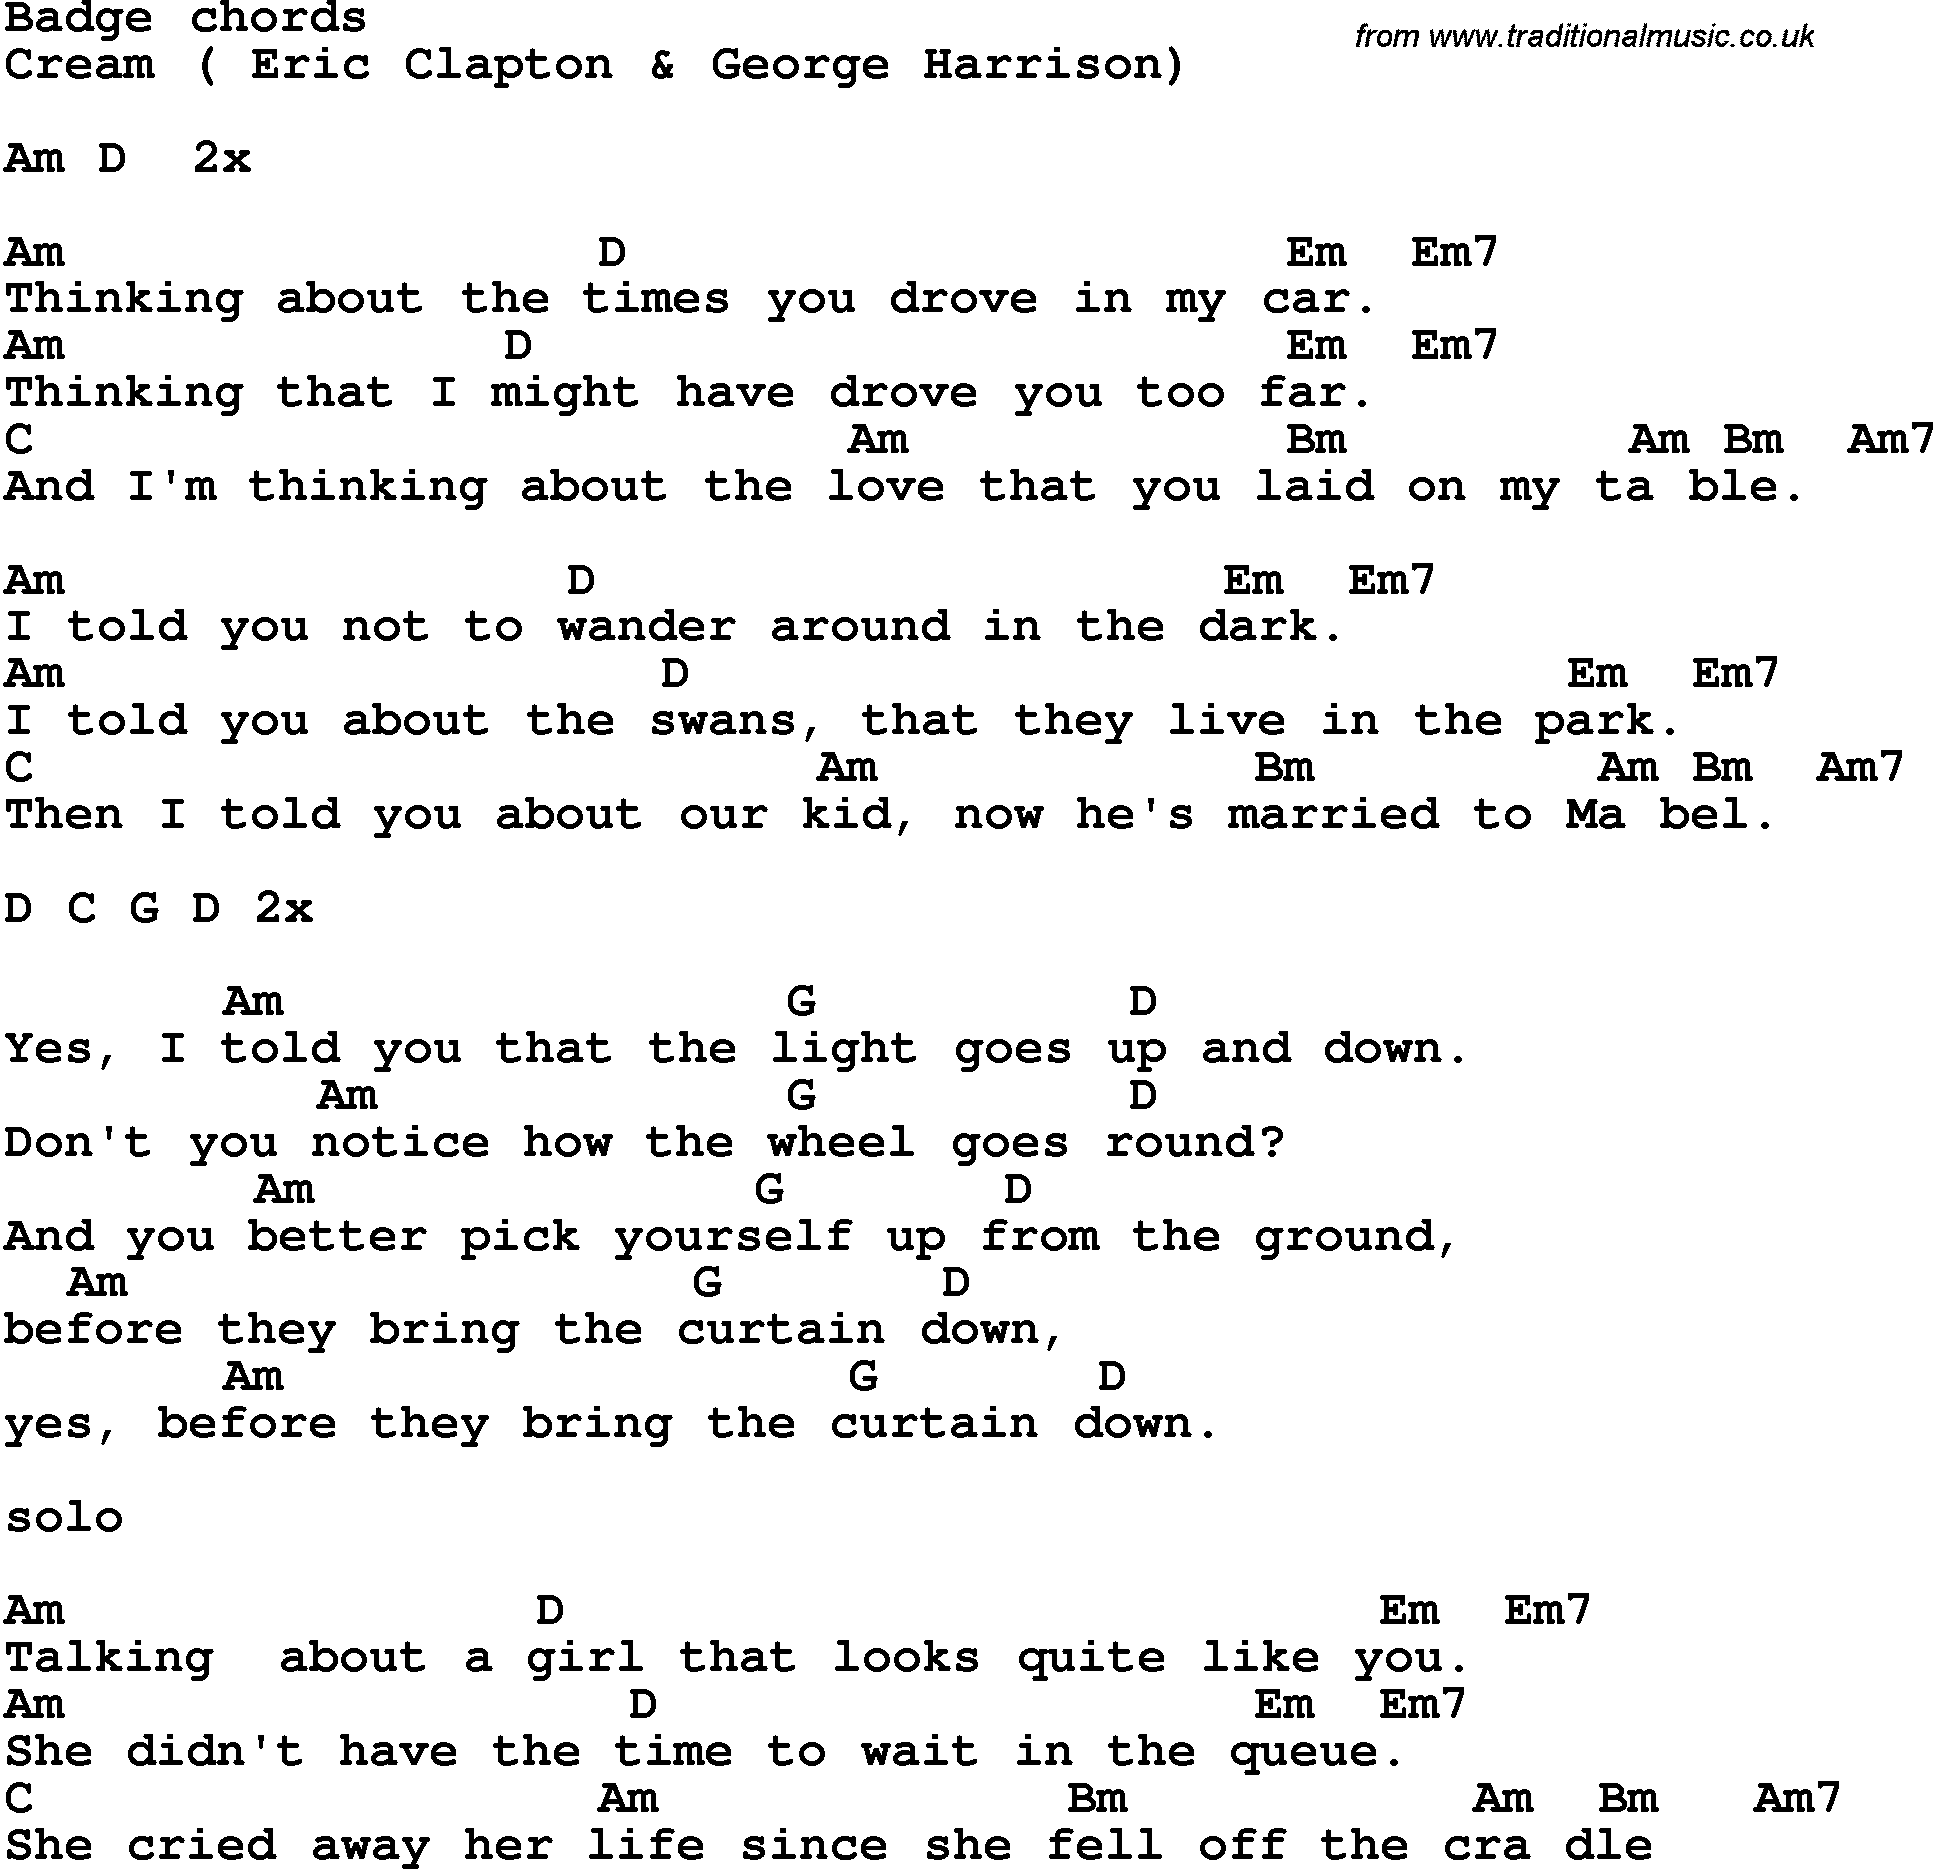 Song Lyrics with guitar chords for Badge